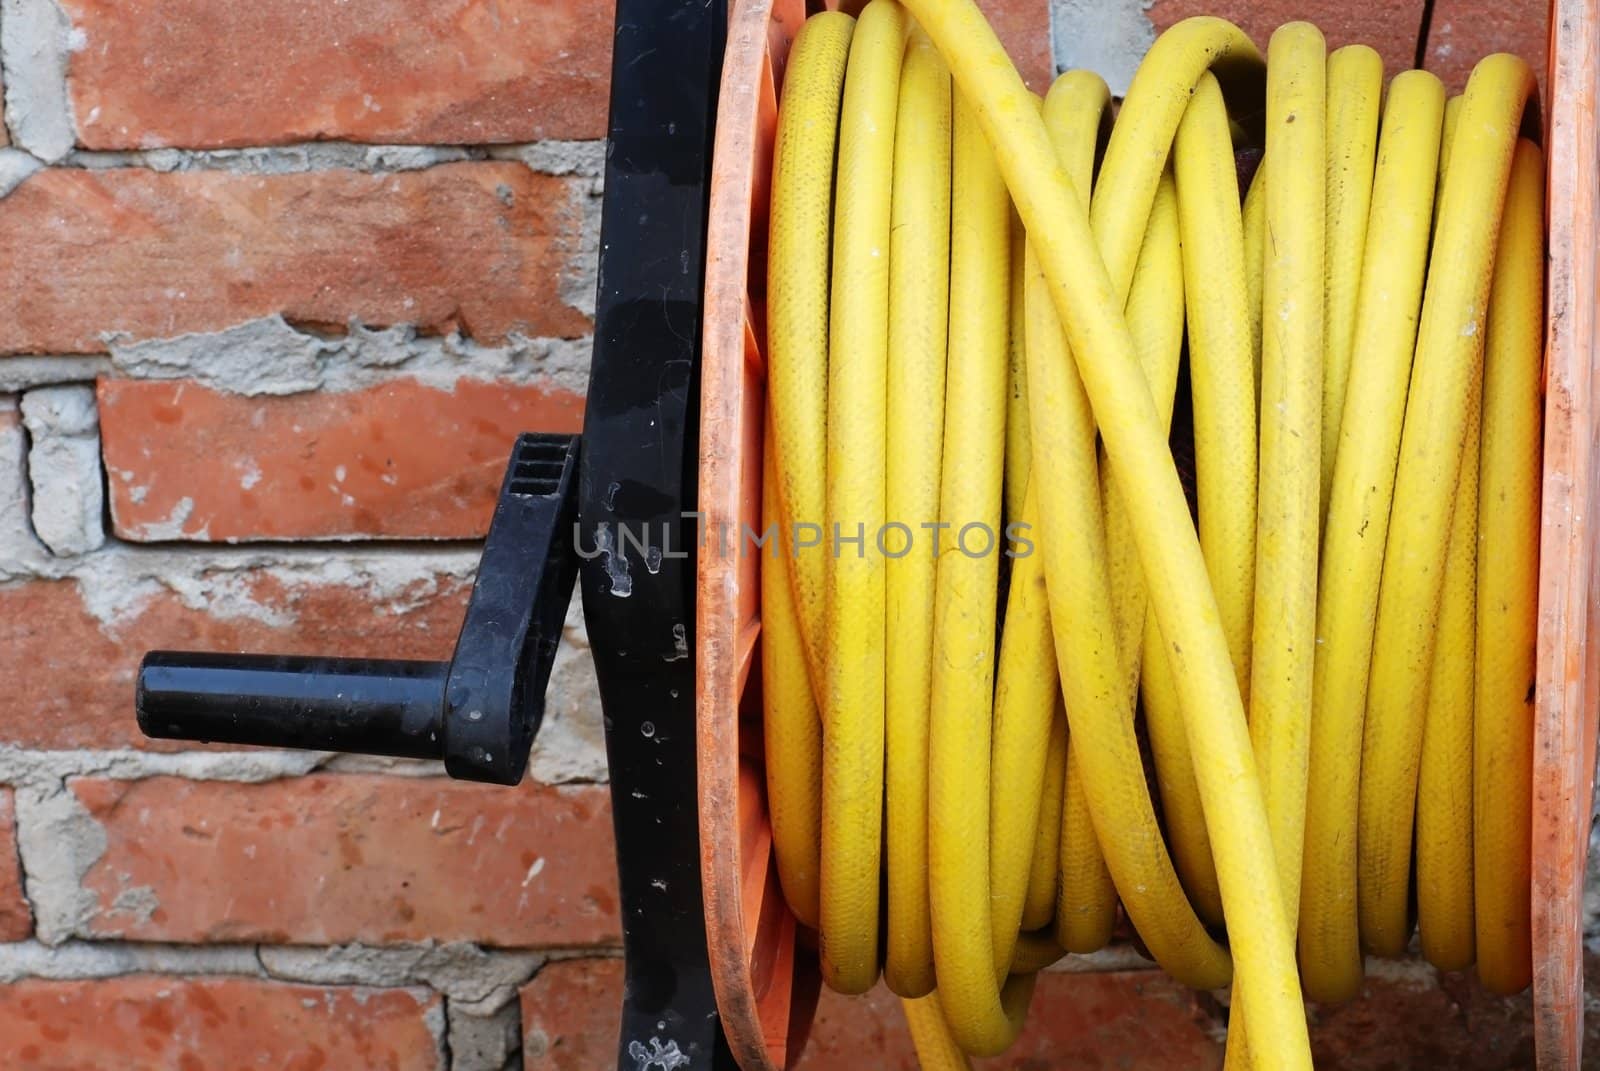 details of yellow garden hose on spool